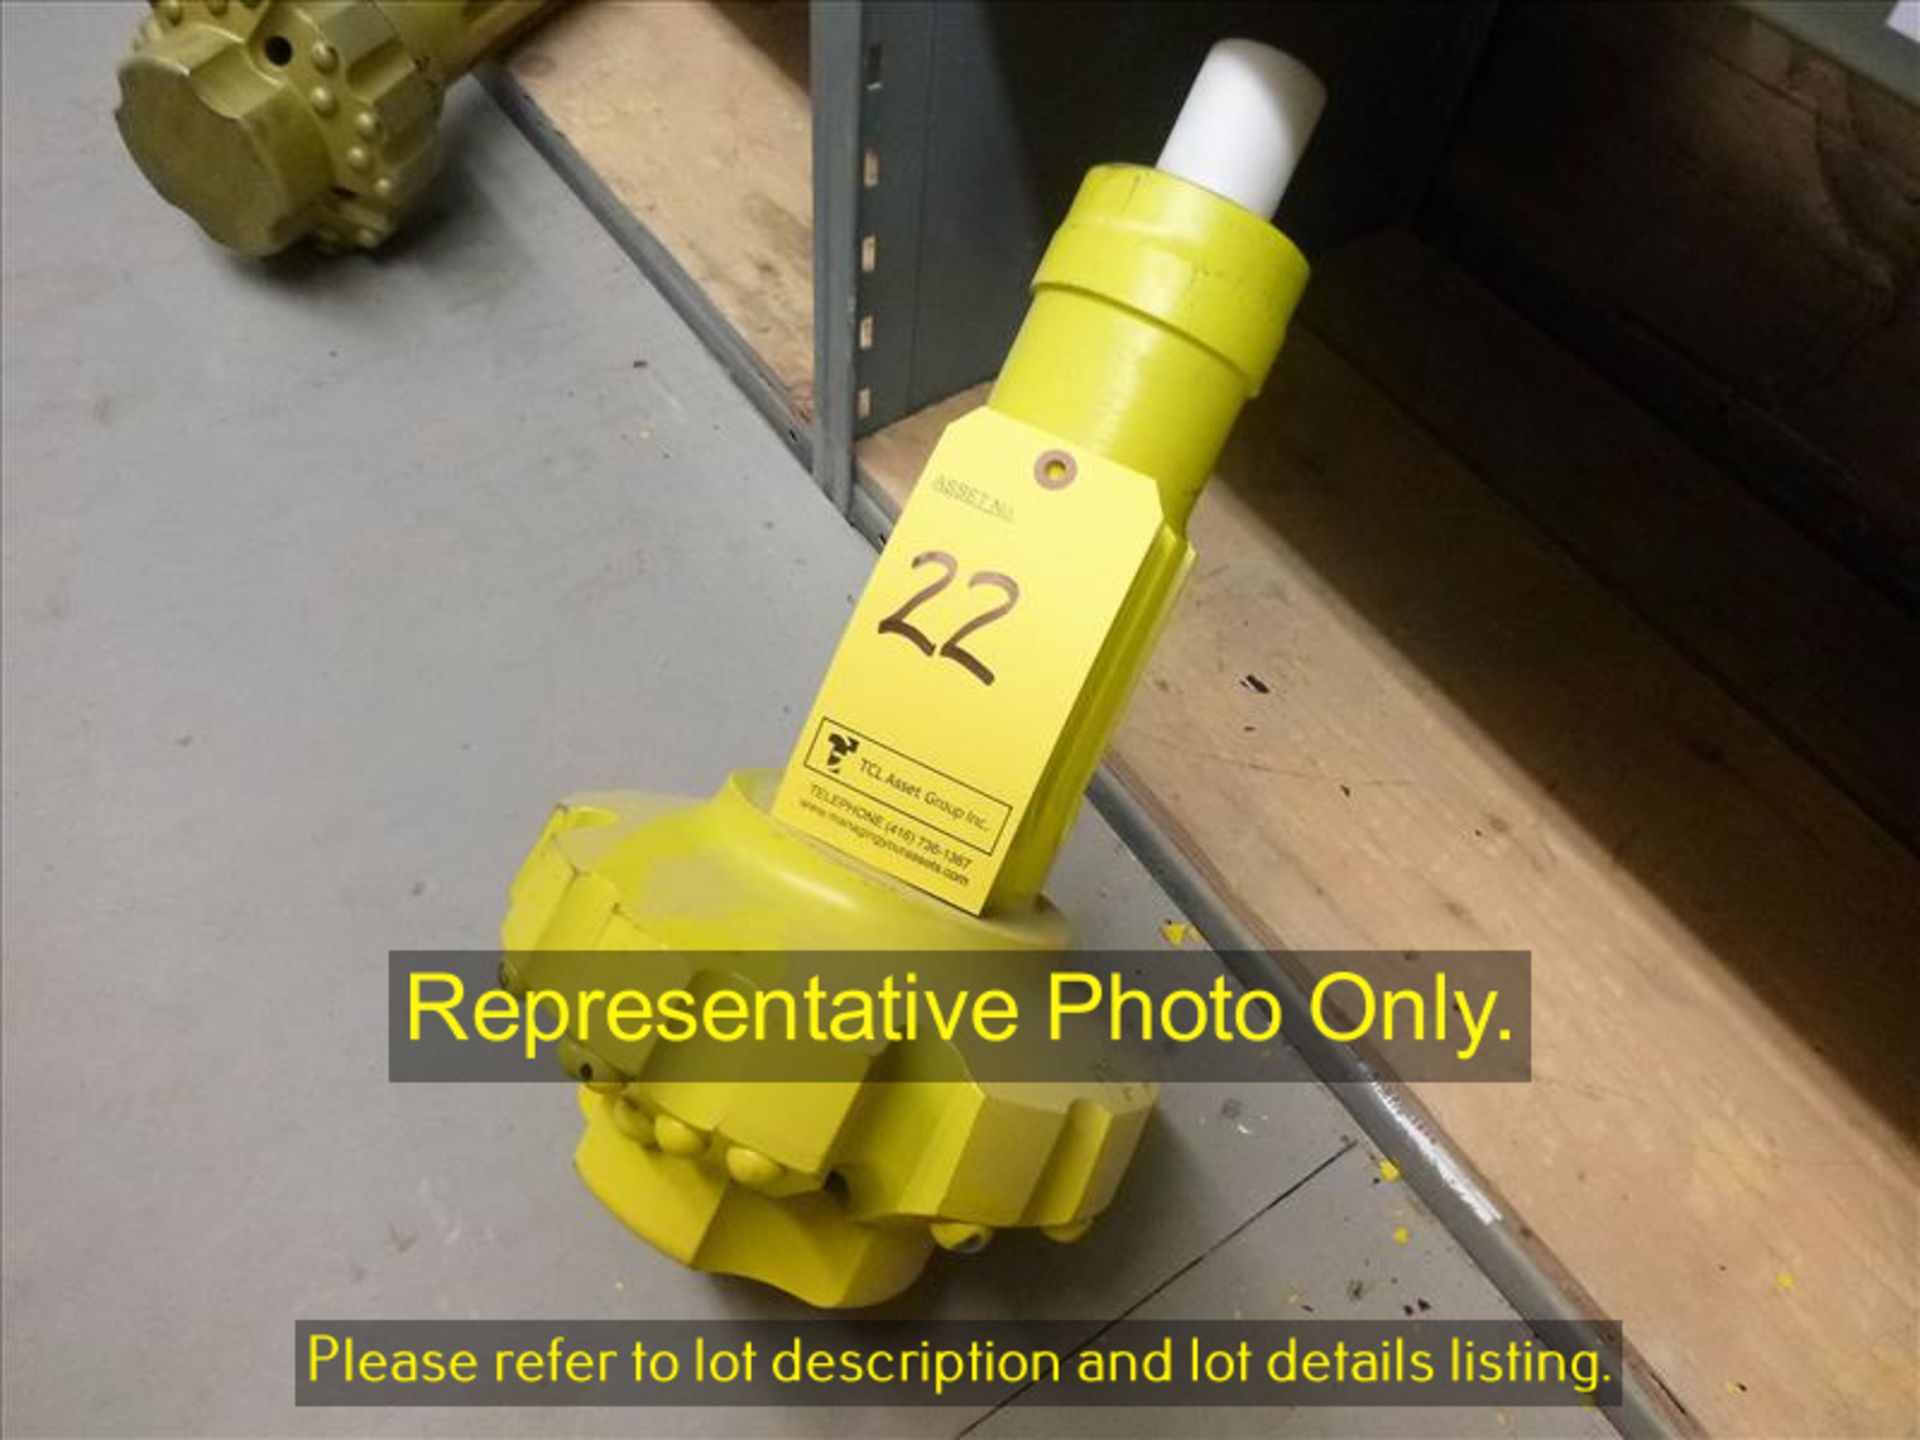 reamer bit, 6 in. to 10 in., p/n 90515042 [Items shown in original packaging may be delivered